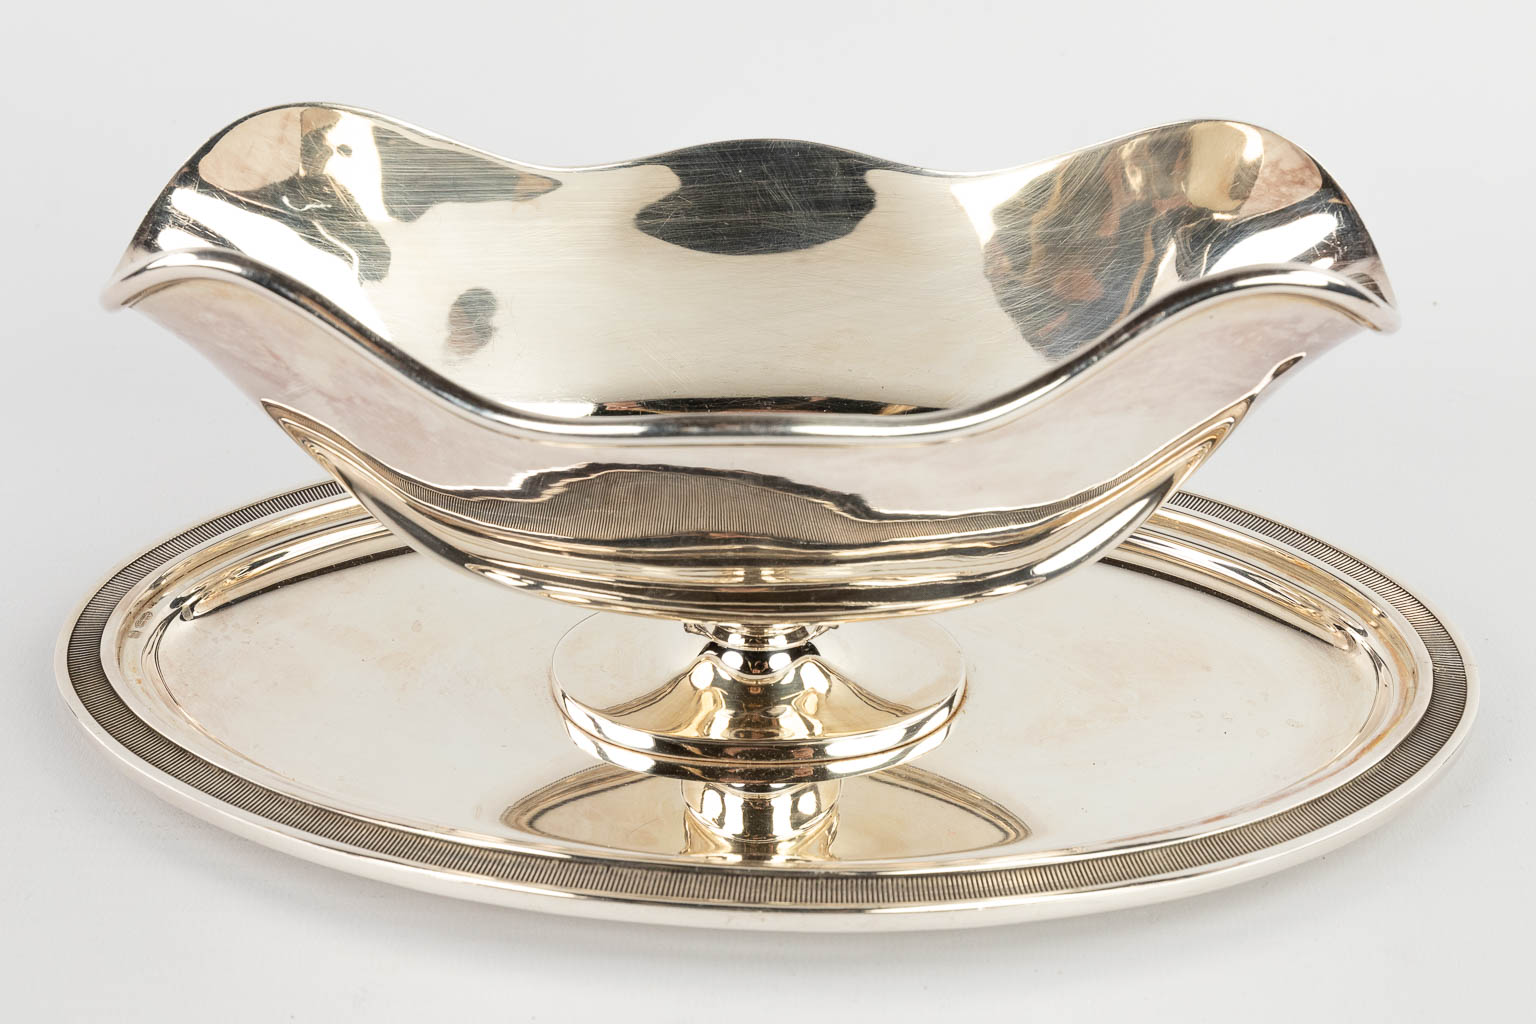 Sivar & Silvergros Ghent, a collection of silver-plated metal table accesories. (D:28 x W:45 cm)